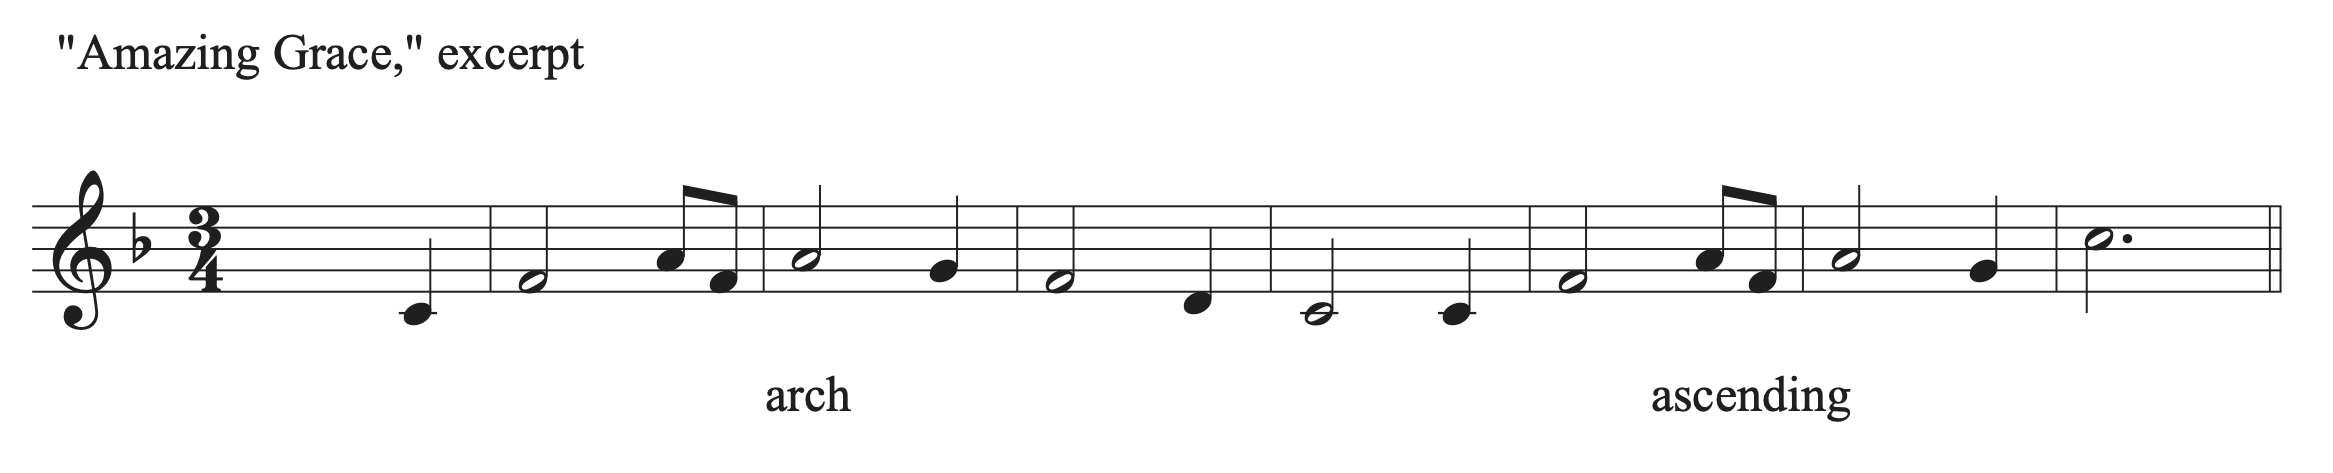 Excerpts from Amazing Grace with an arch and ascending line labeled.